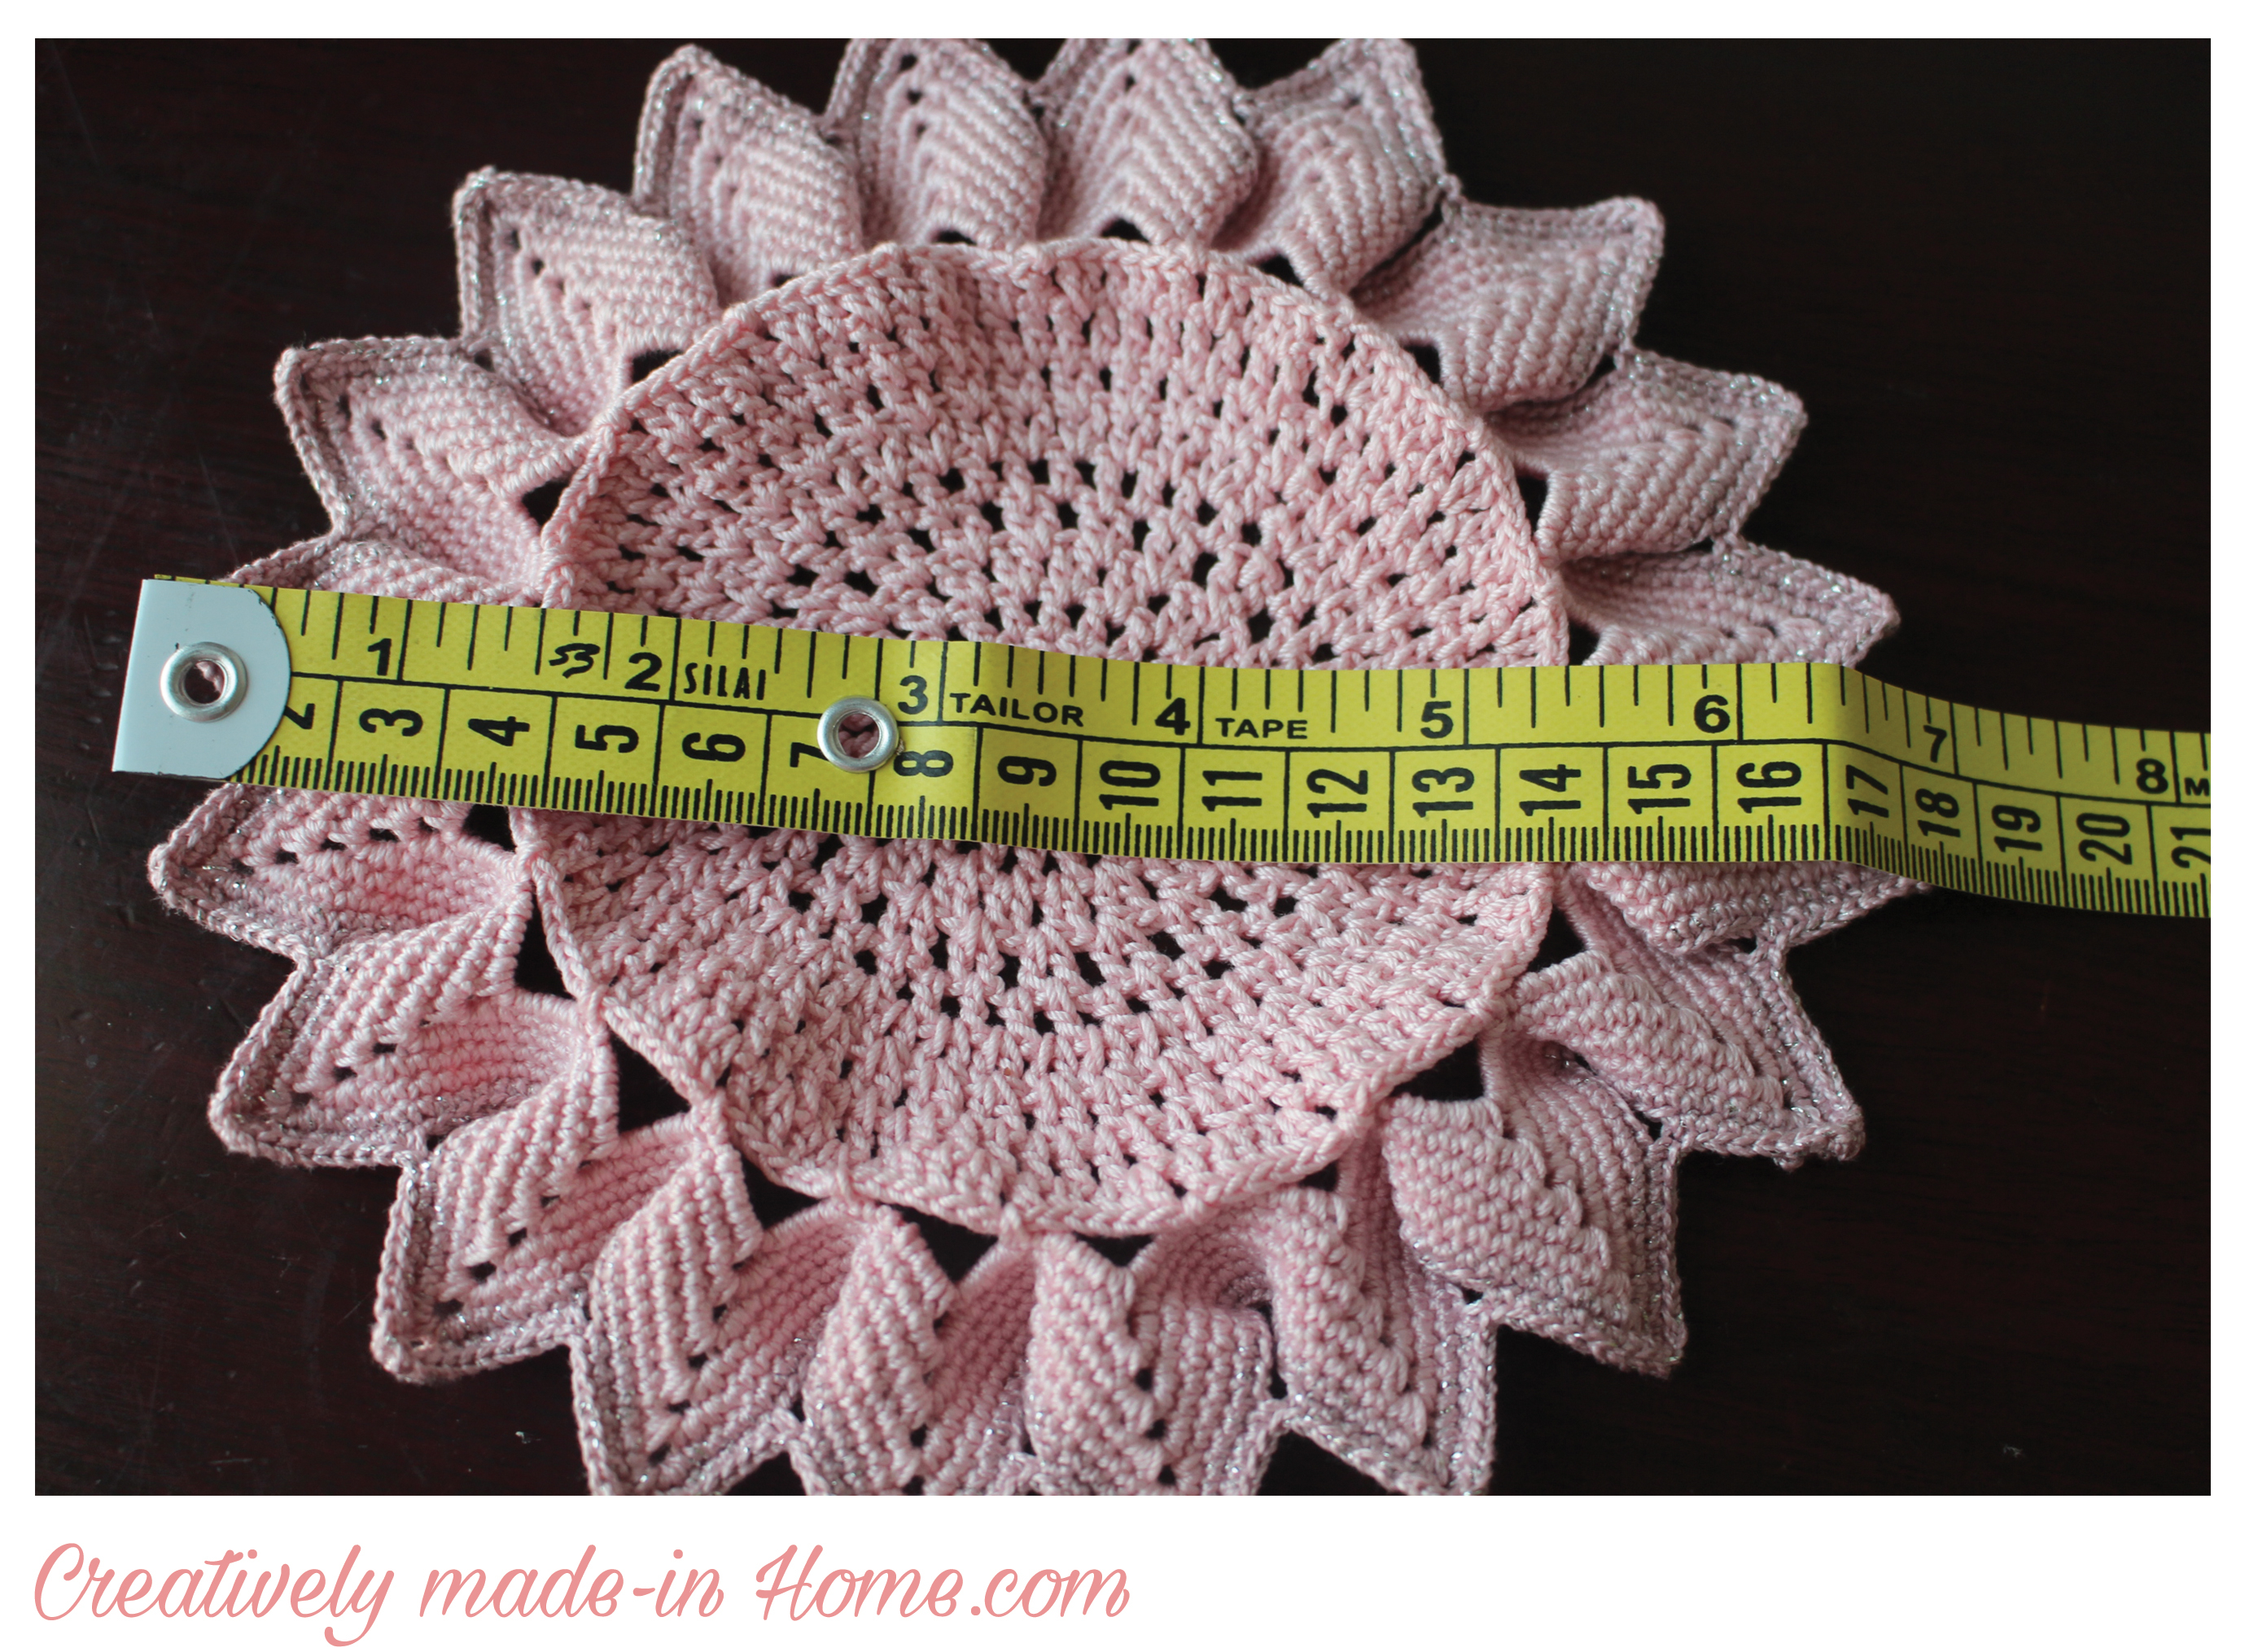 Crochet Centerpiece Pattern How To Crochet A Beautiful Doily Table Centerpiece Creatively